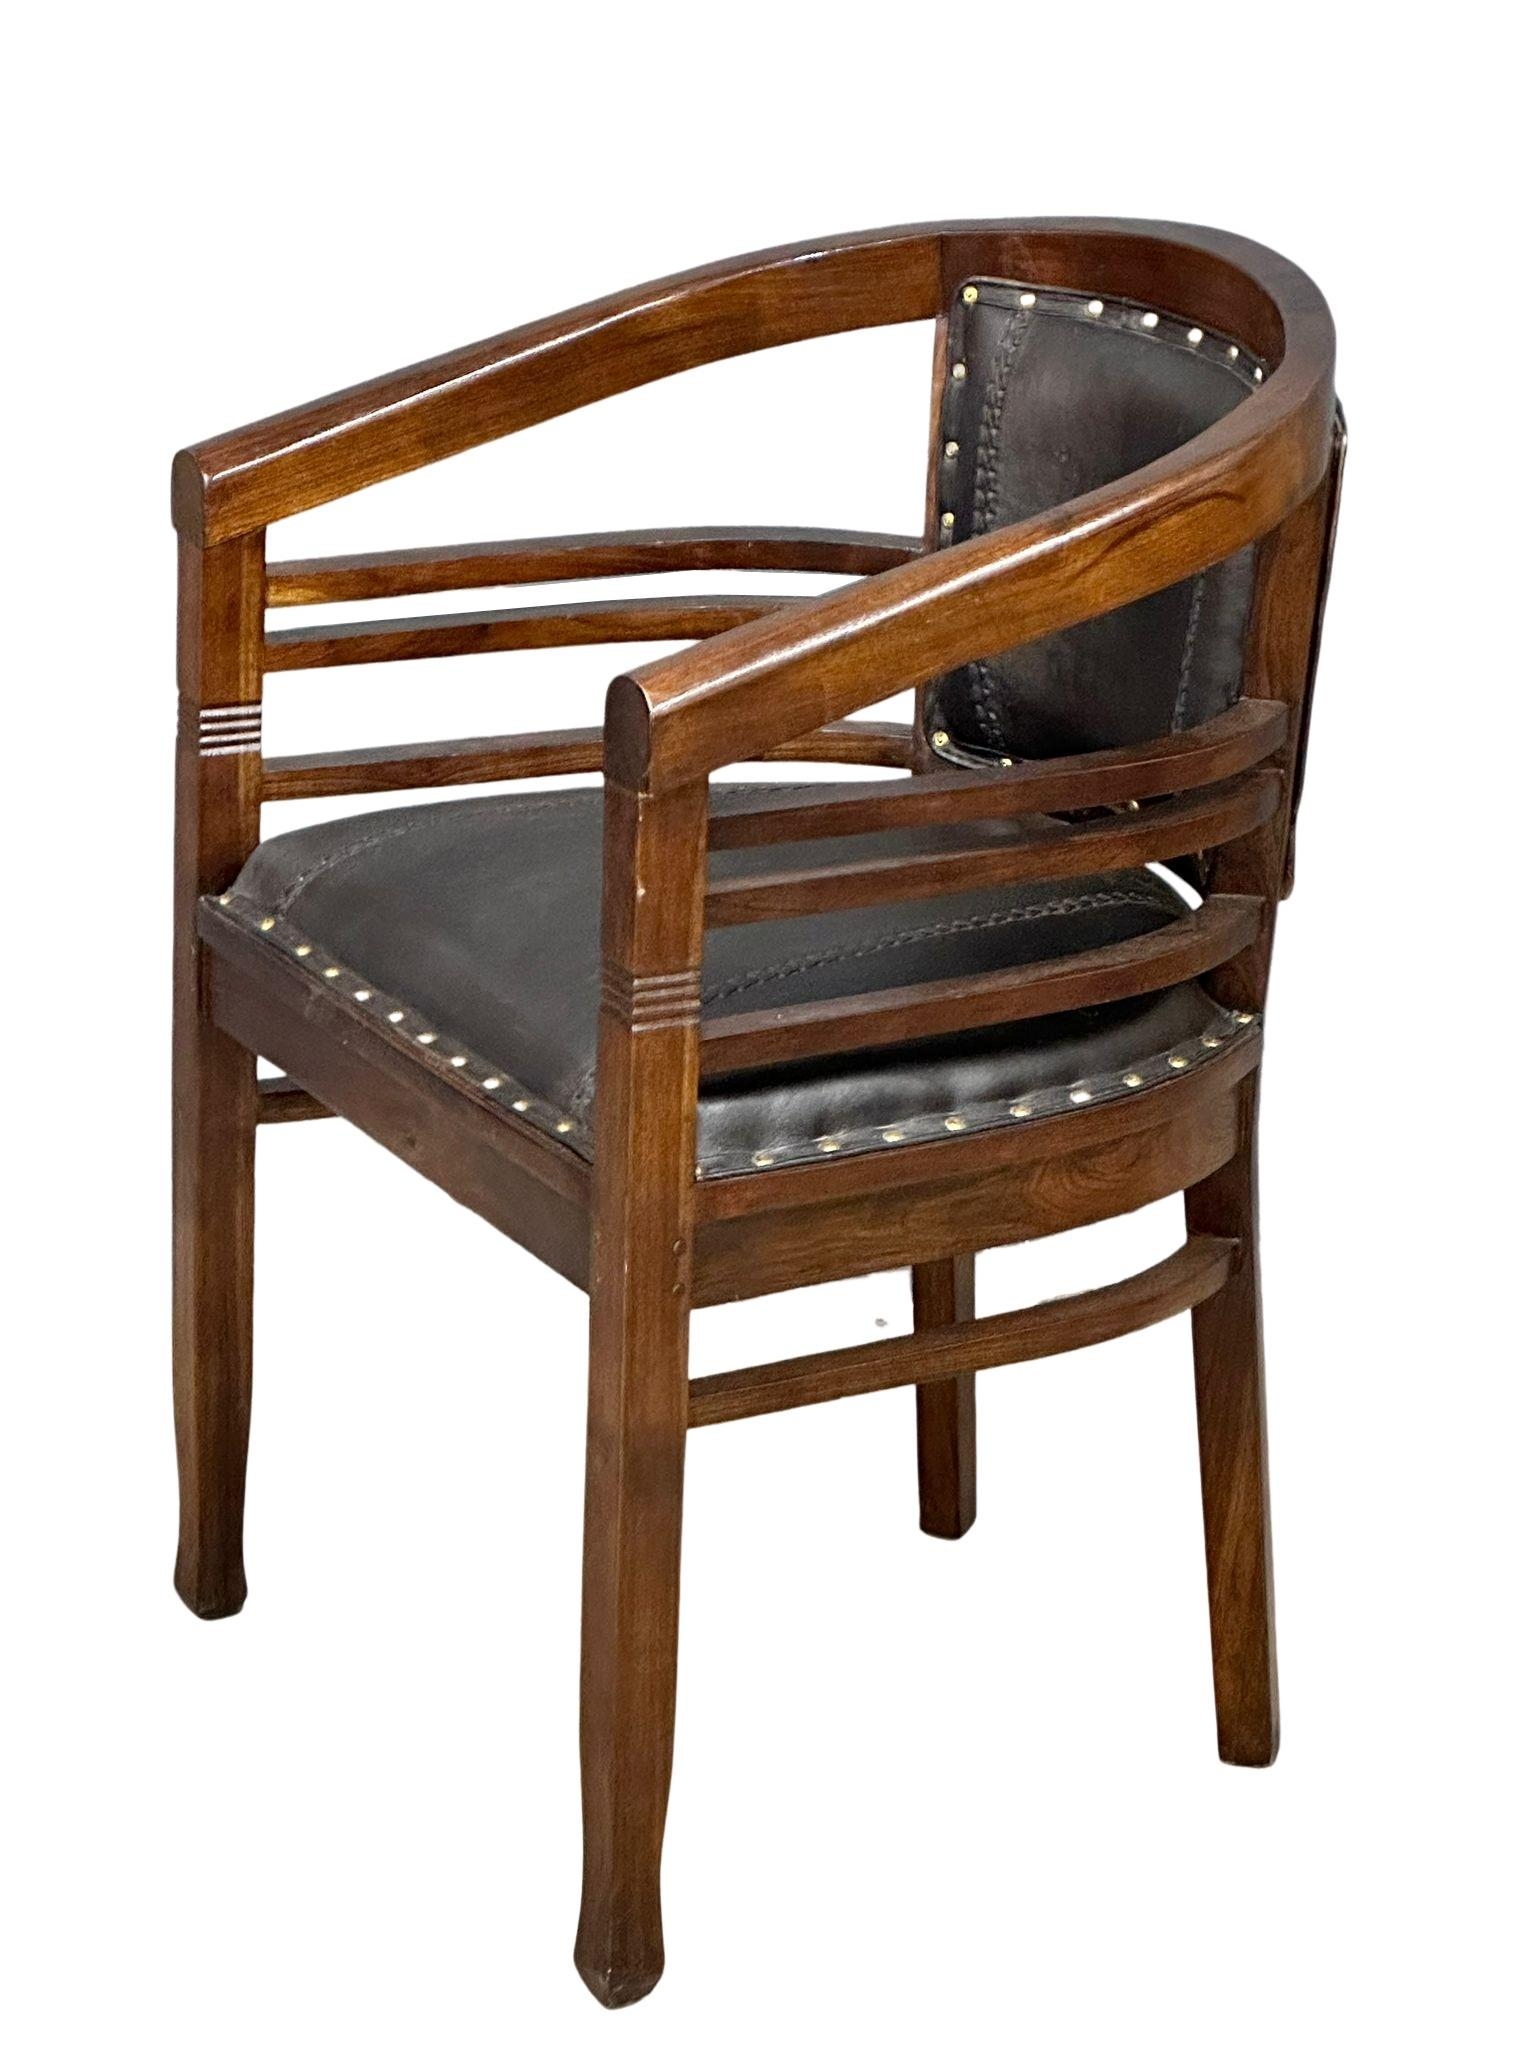 A Victorian style mahogany framed desk chair with leather back and seat secured with brass studs. - Image 2 of 5